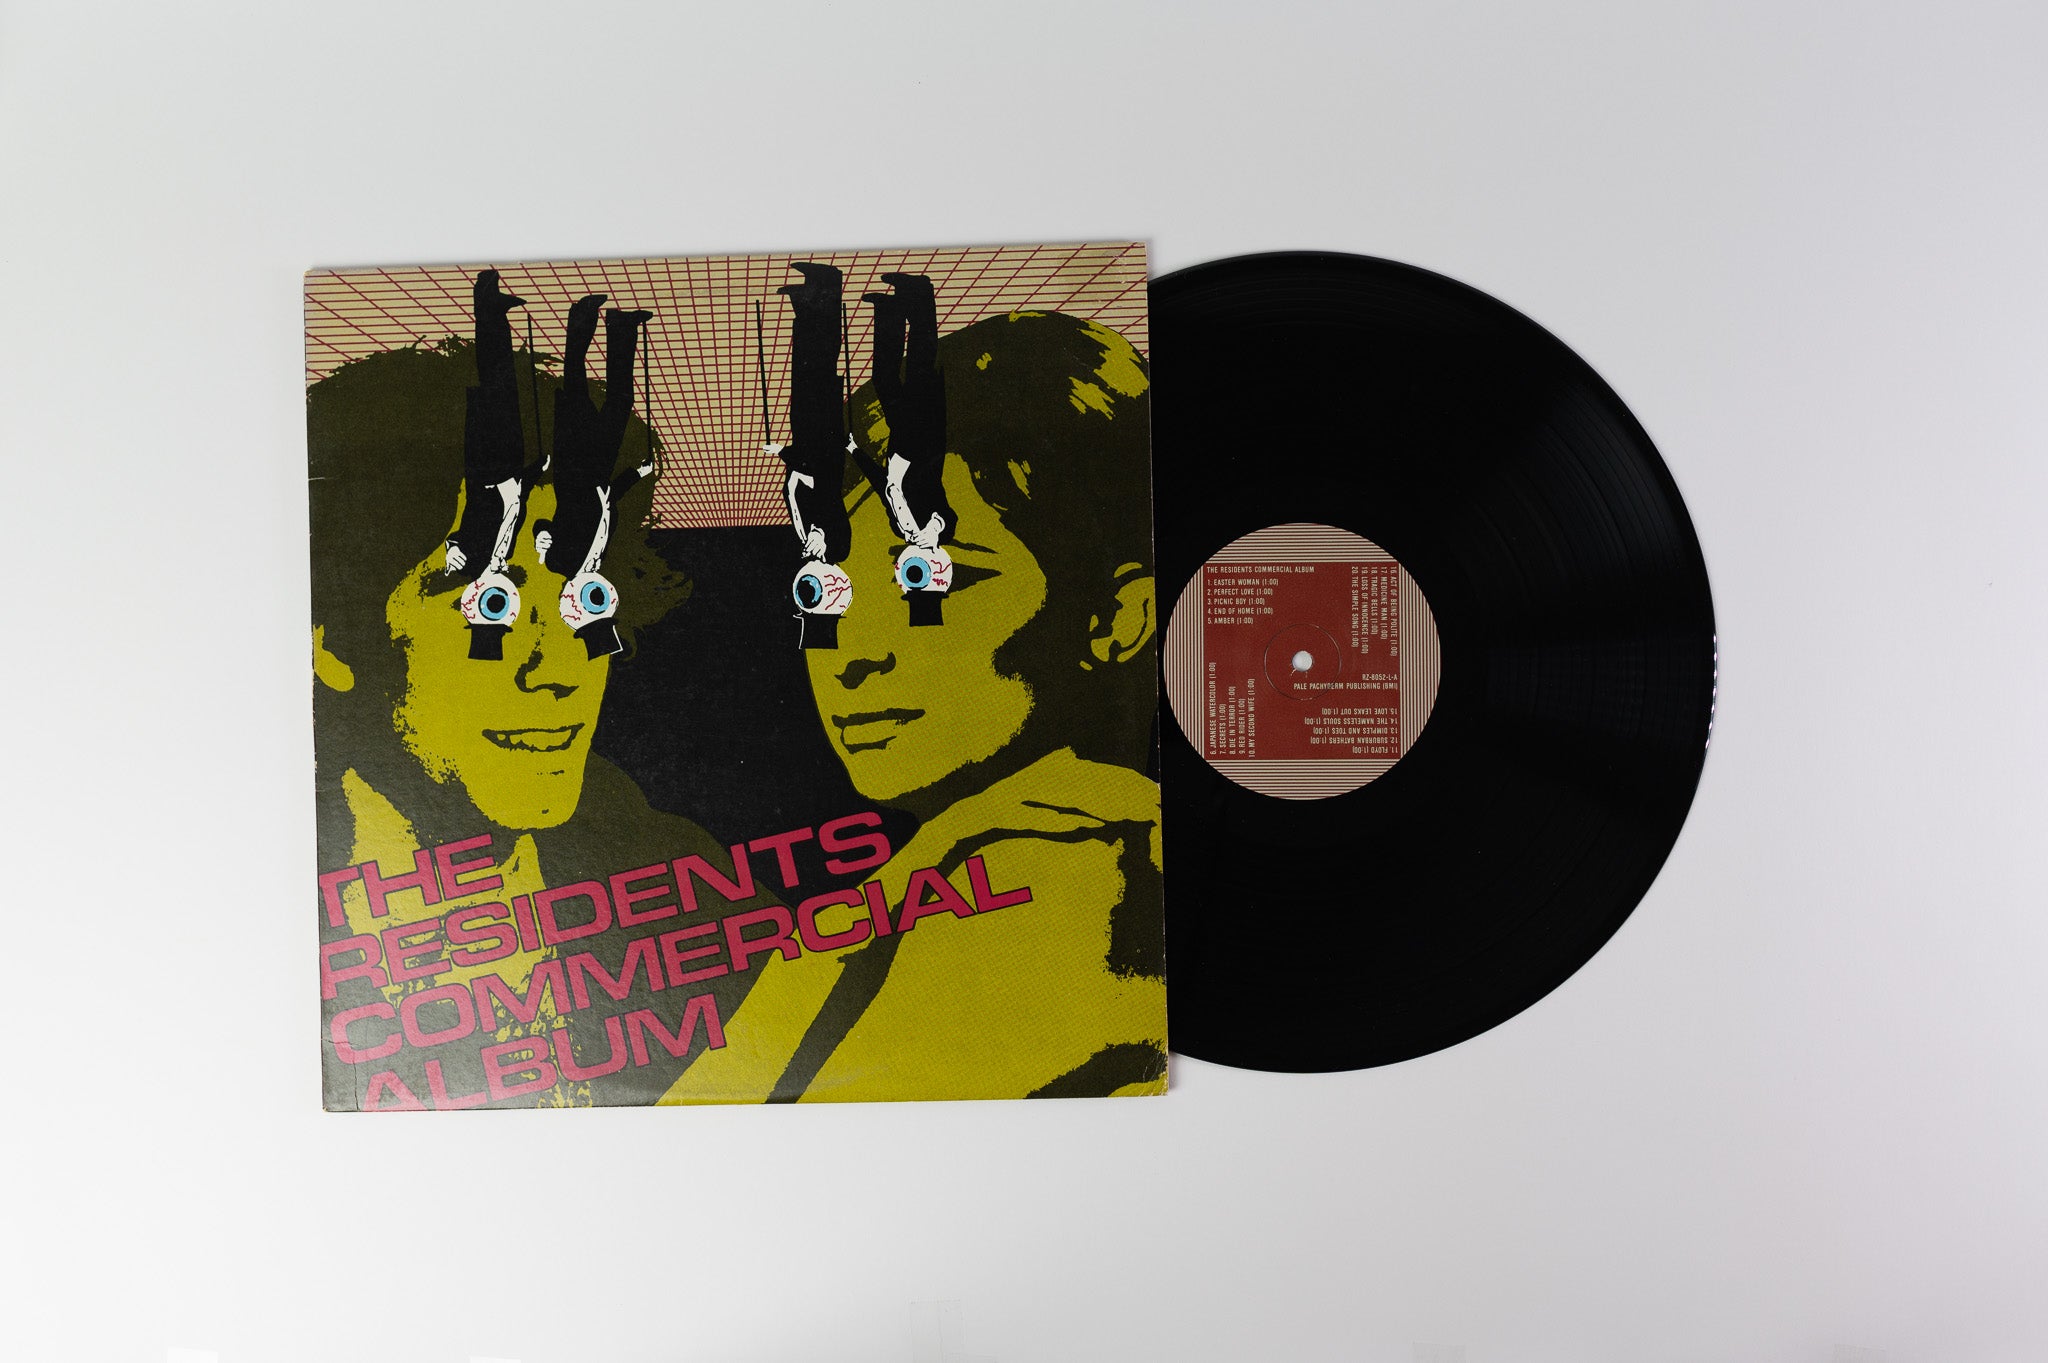 The Residents - Commercial Album on Ralph Reissue